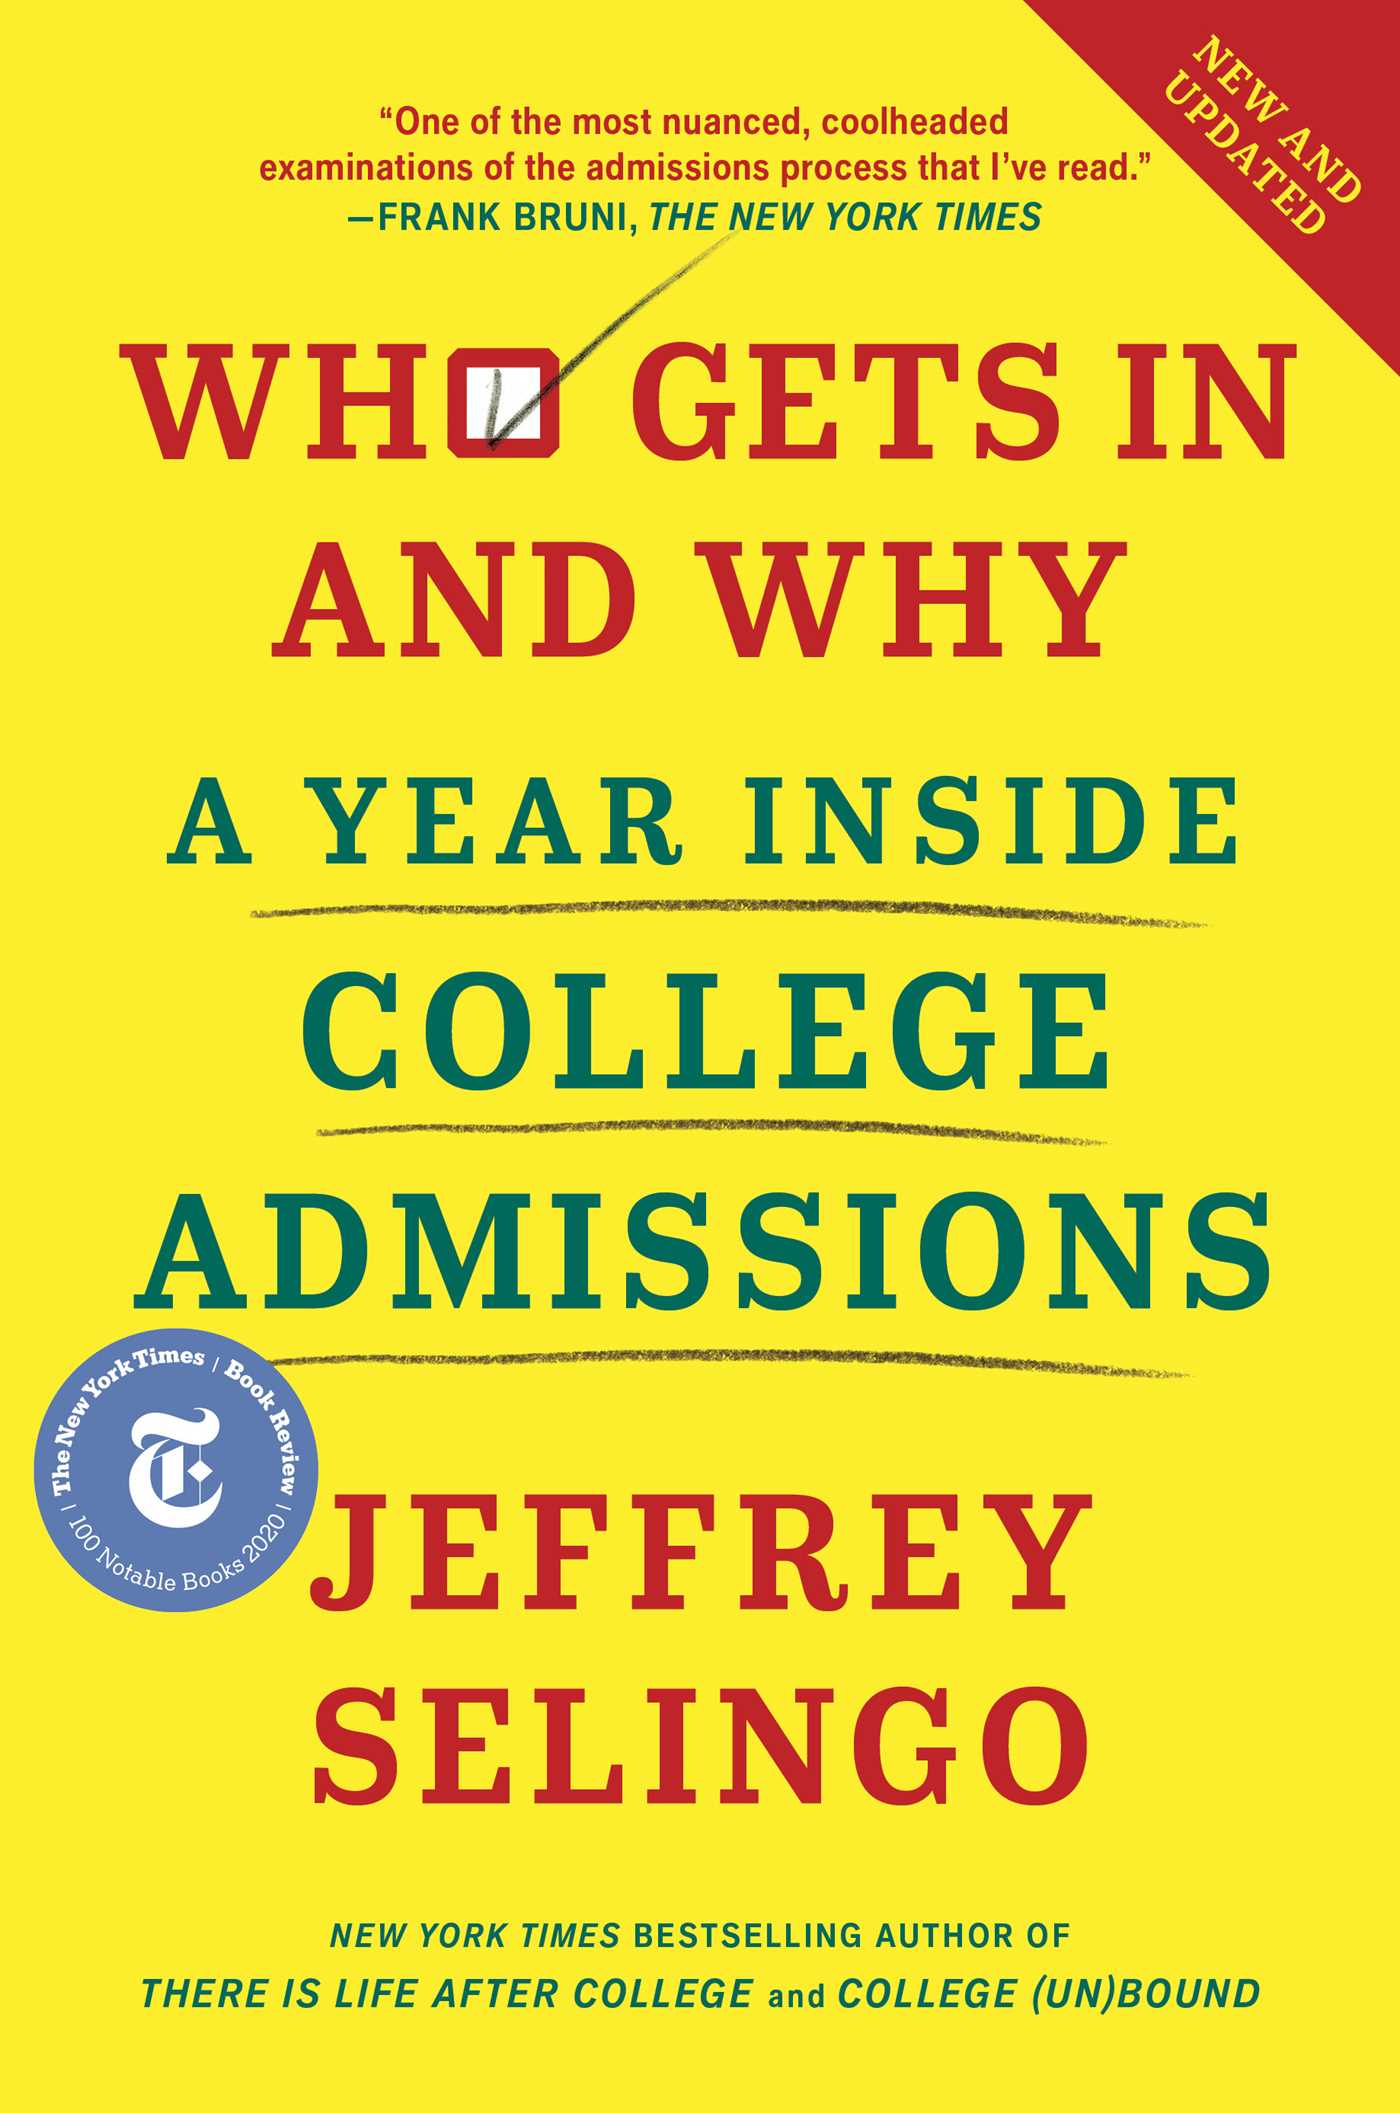 Are You Aware of Jeff Selingo’s List of College Buyers and Sellers?